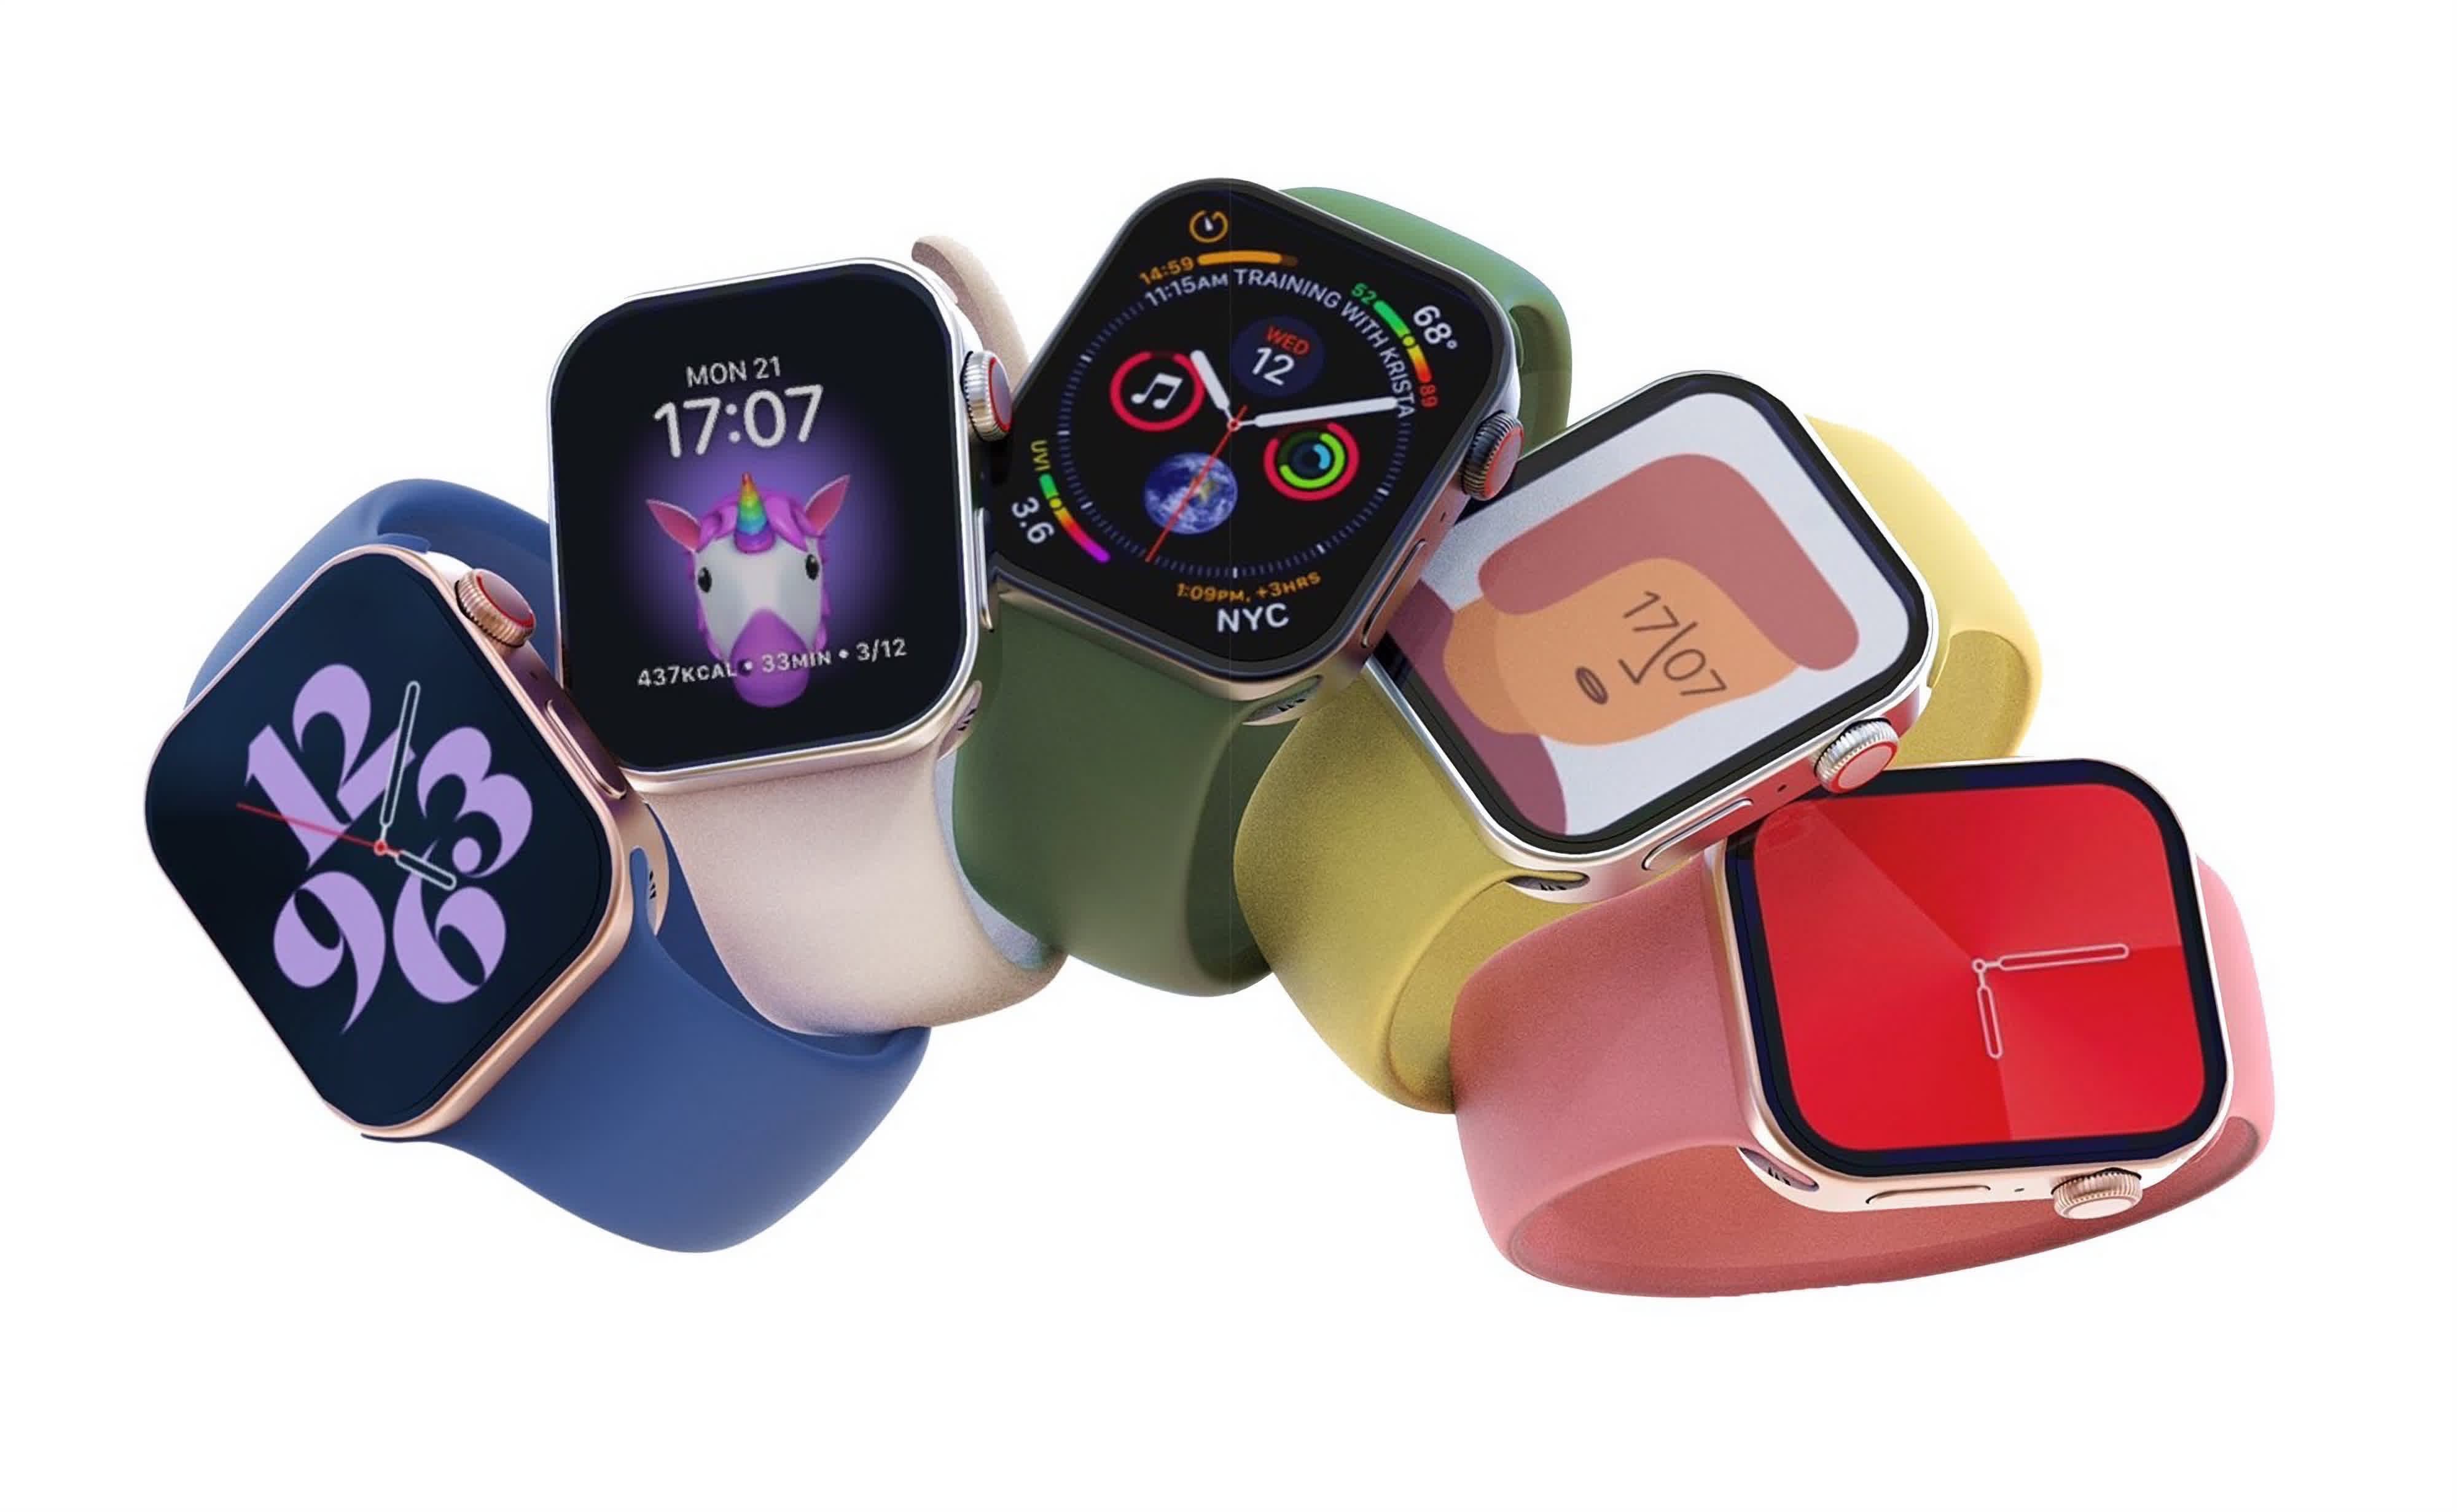 Apple Watch Series 7 said to feature blood pressure monitoring, will arrive later than expected